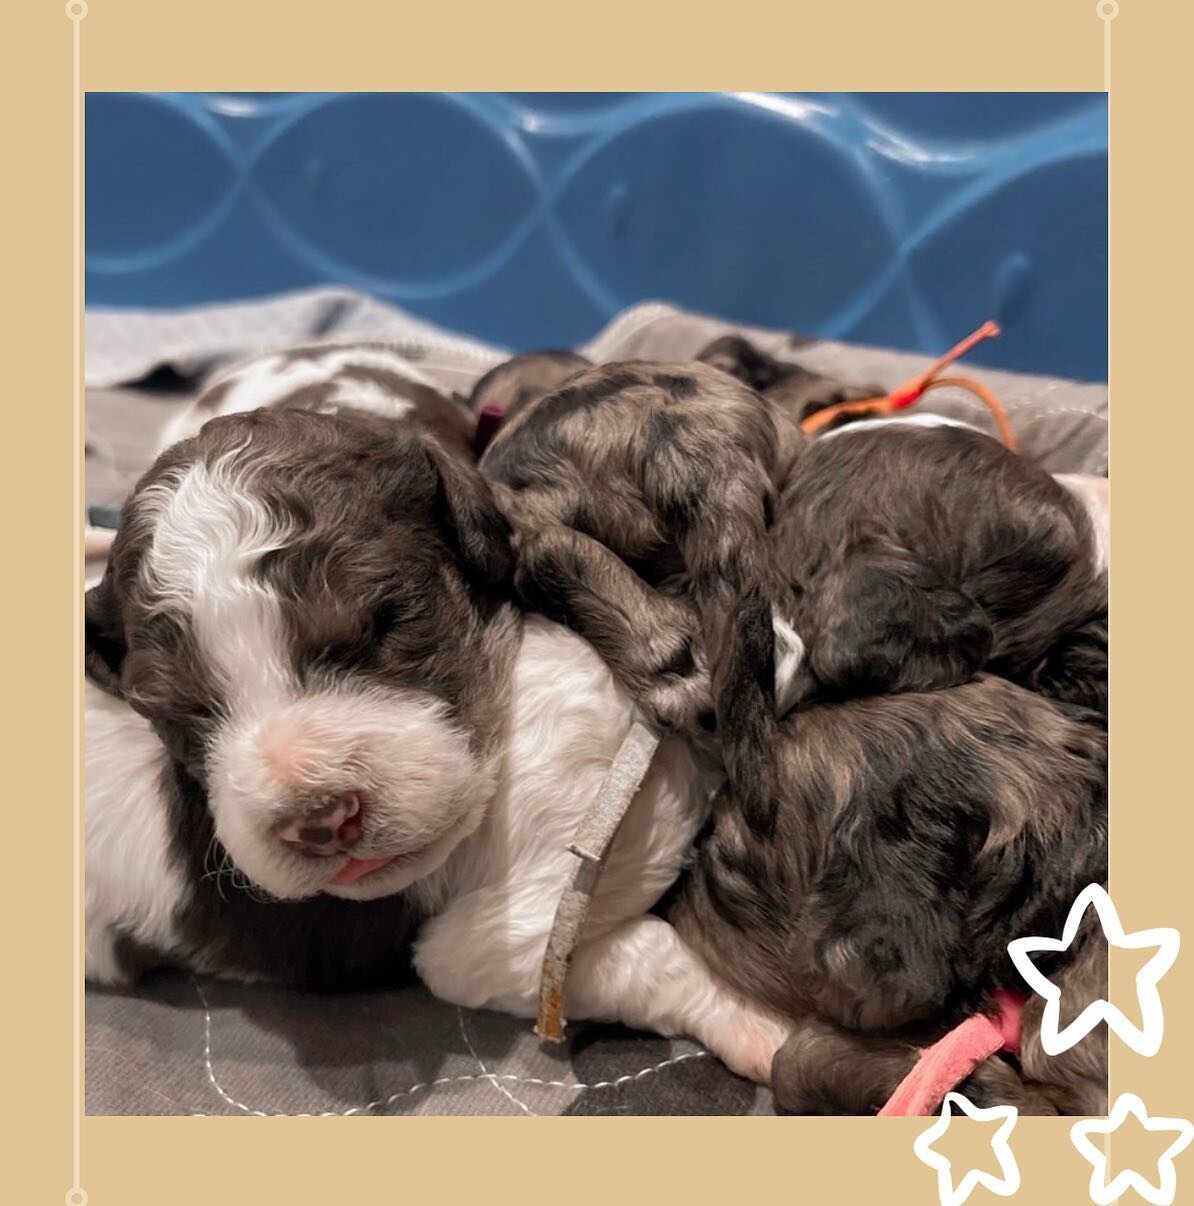 How precious is this cavapoo litter?! 🤍
.
.
.

#cavapoosofinstagram #doodlesofinstagram #doodlesofarizona #arizona #phoenix #doodlebreeder #arizonabreeder #responsiblebreeders #puppiesofinstagram #dogsofinstagram #puppylove #doodlelove #doodlelovers